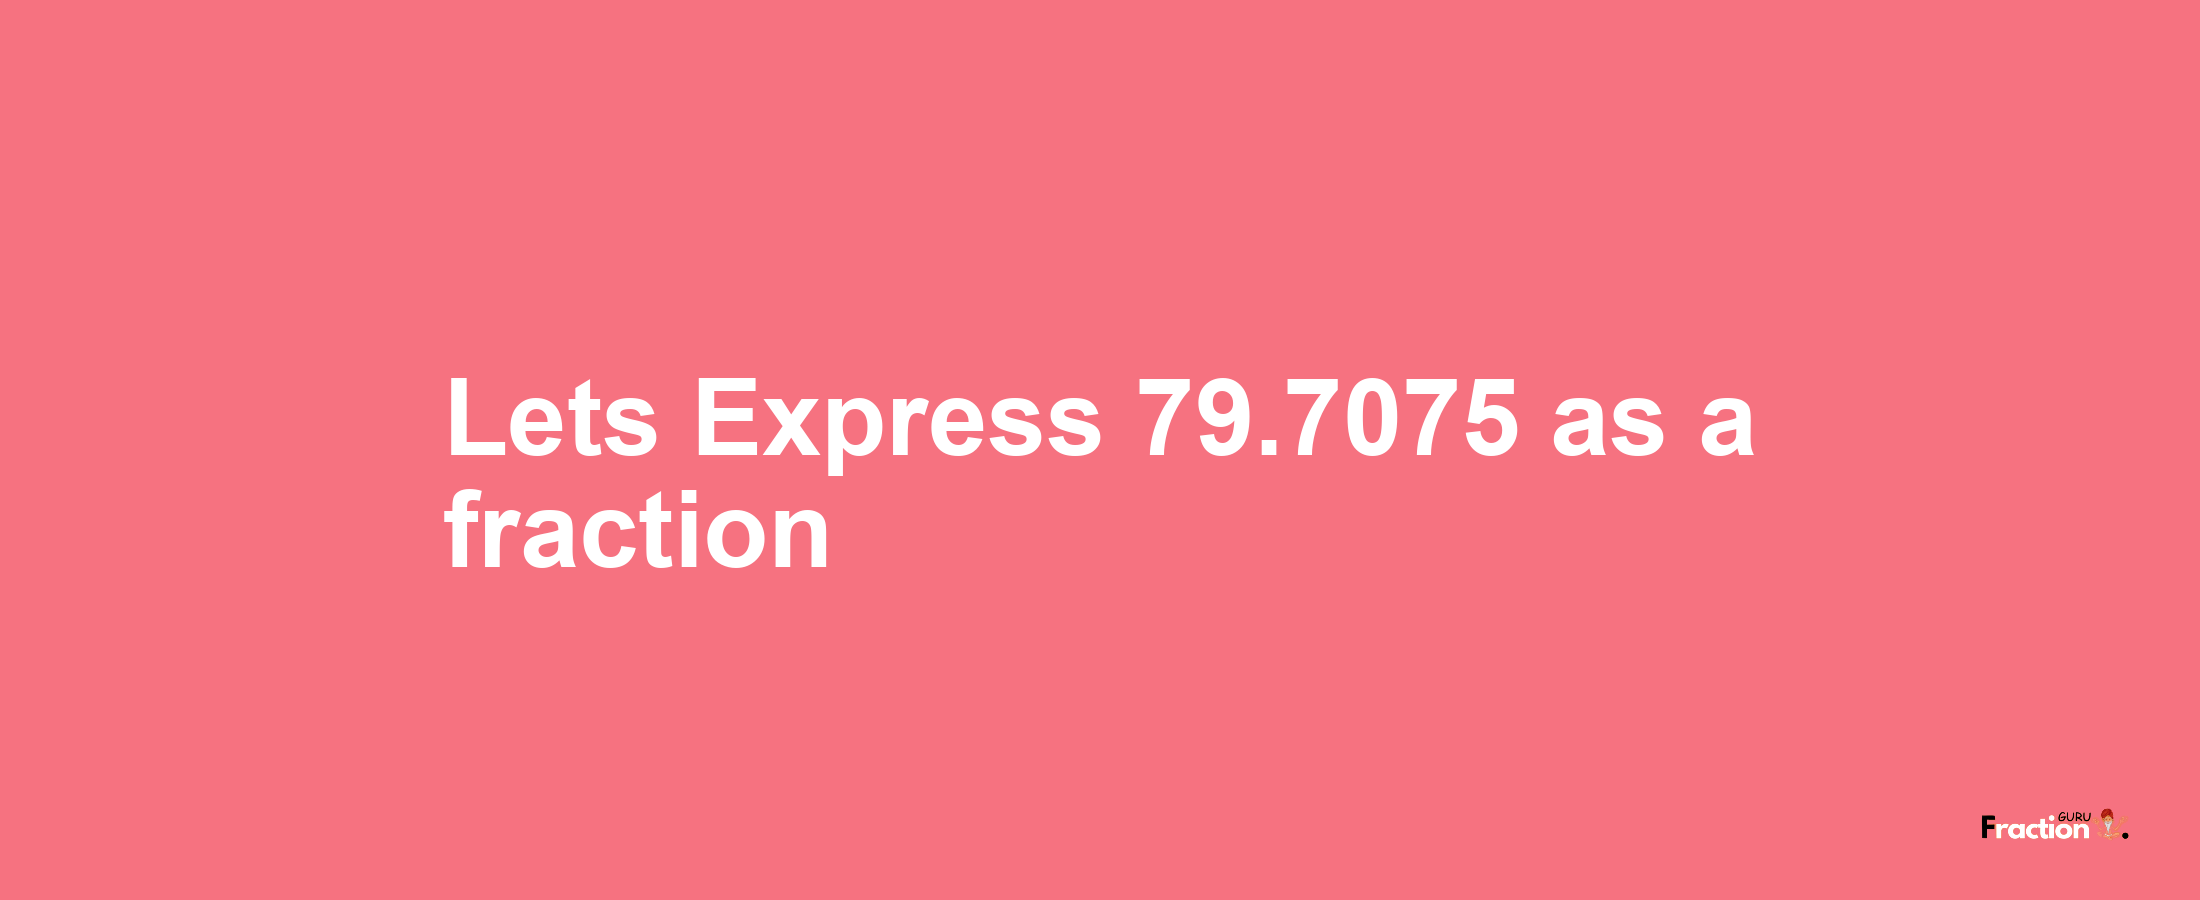 Lets Express 79.7075 as afraction